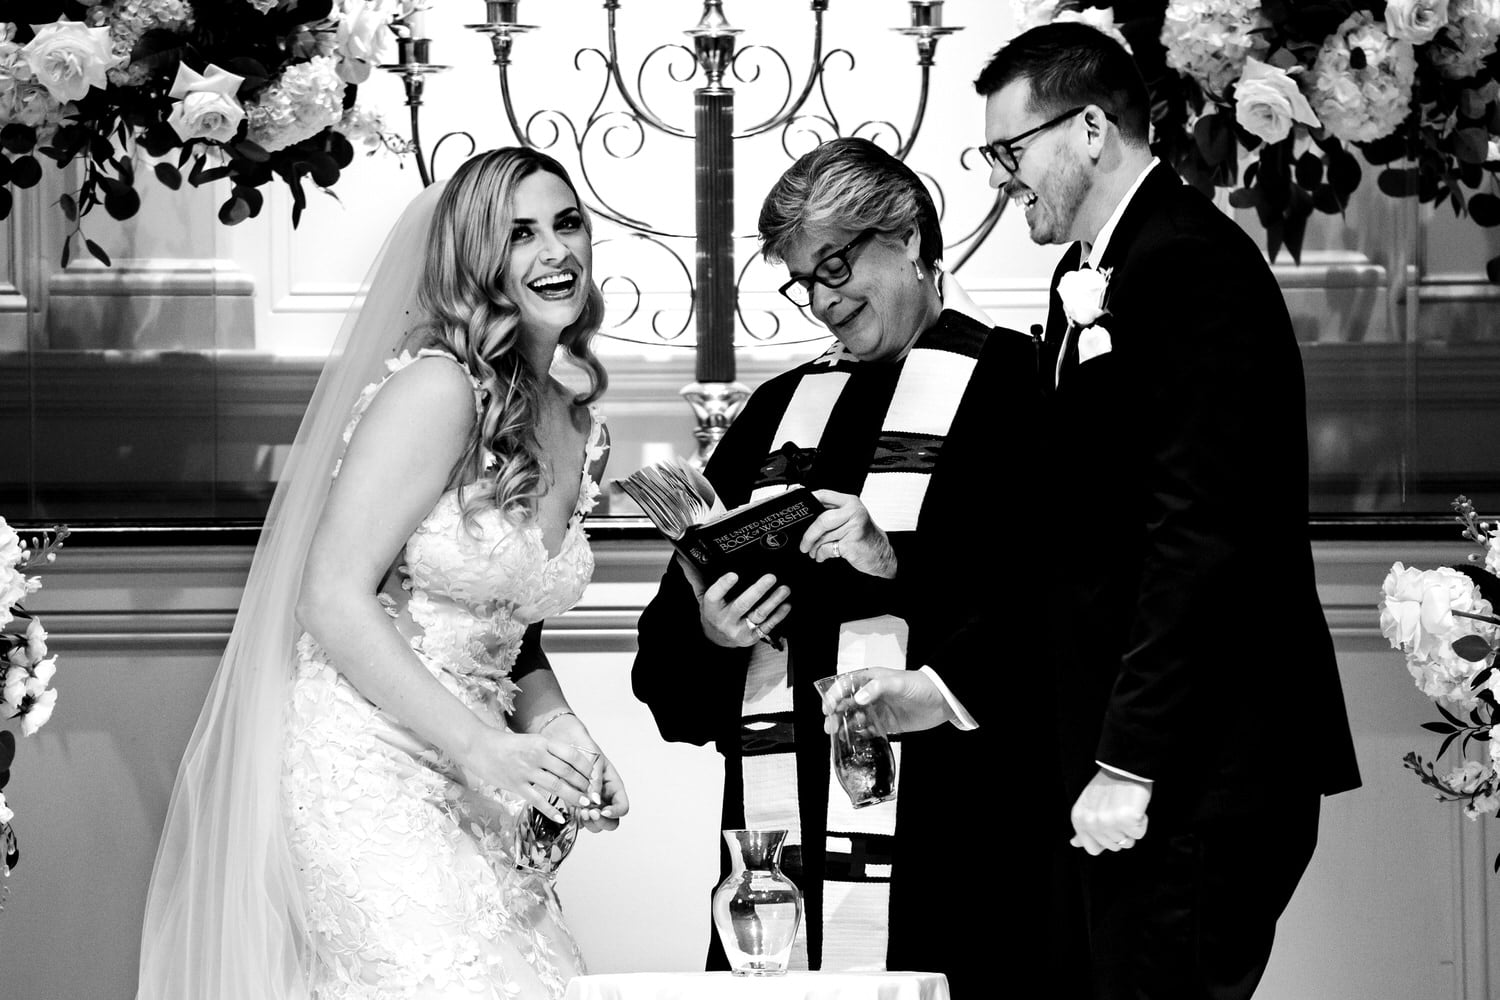 A candid black and white picture taken during a wedding ceremony of a bride in a long veil laughing and looking towards the camera as a groom in a black tuxedo laughs and looks at the bride as they get ready to pour sand into their unity jar during an black tie October wedding in Kansas City. 